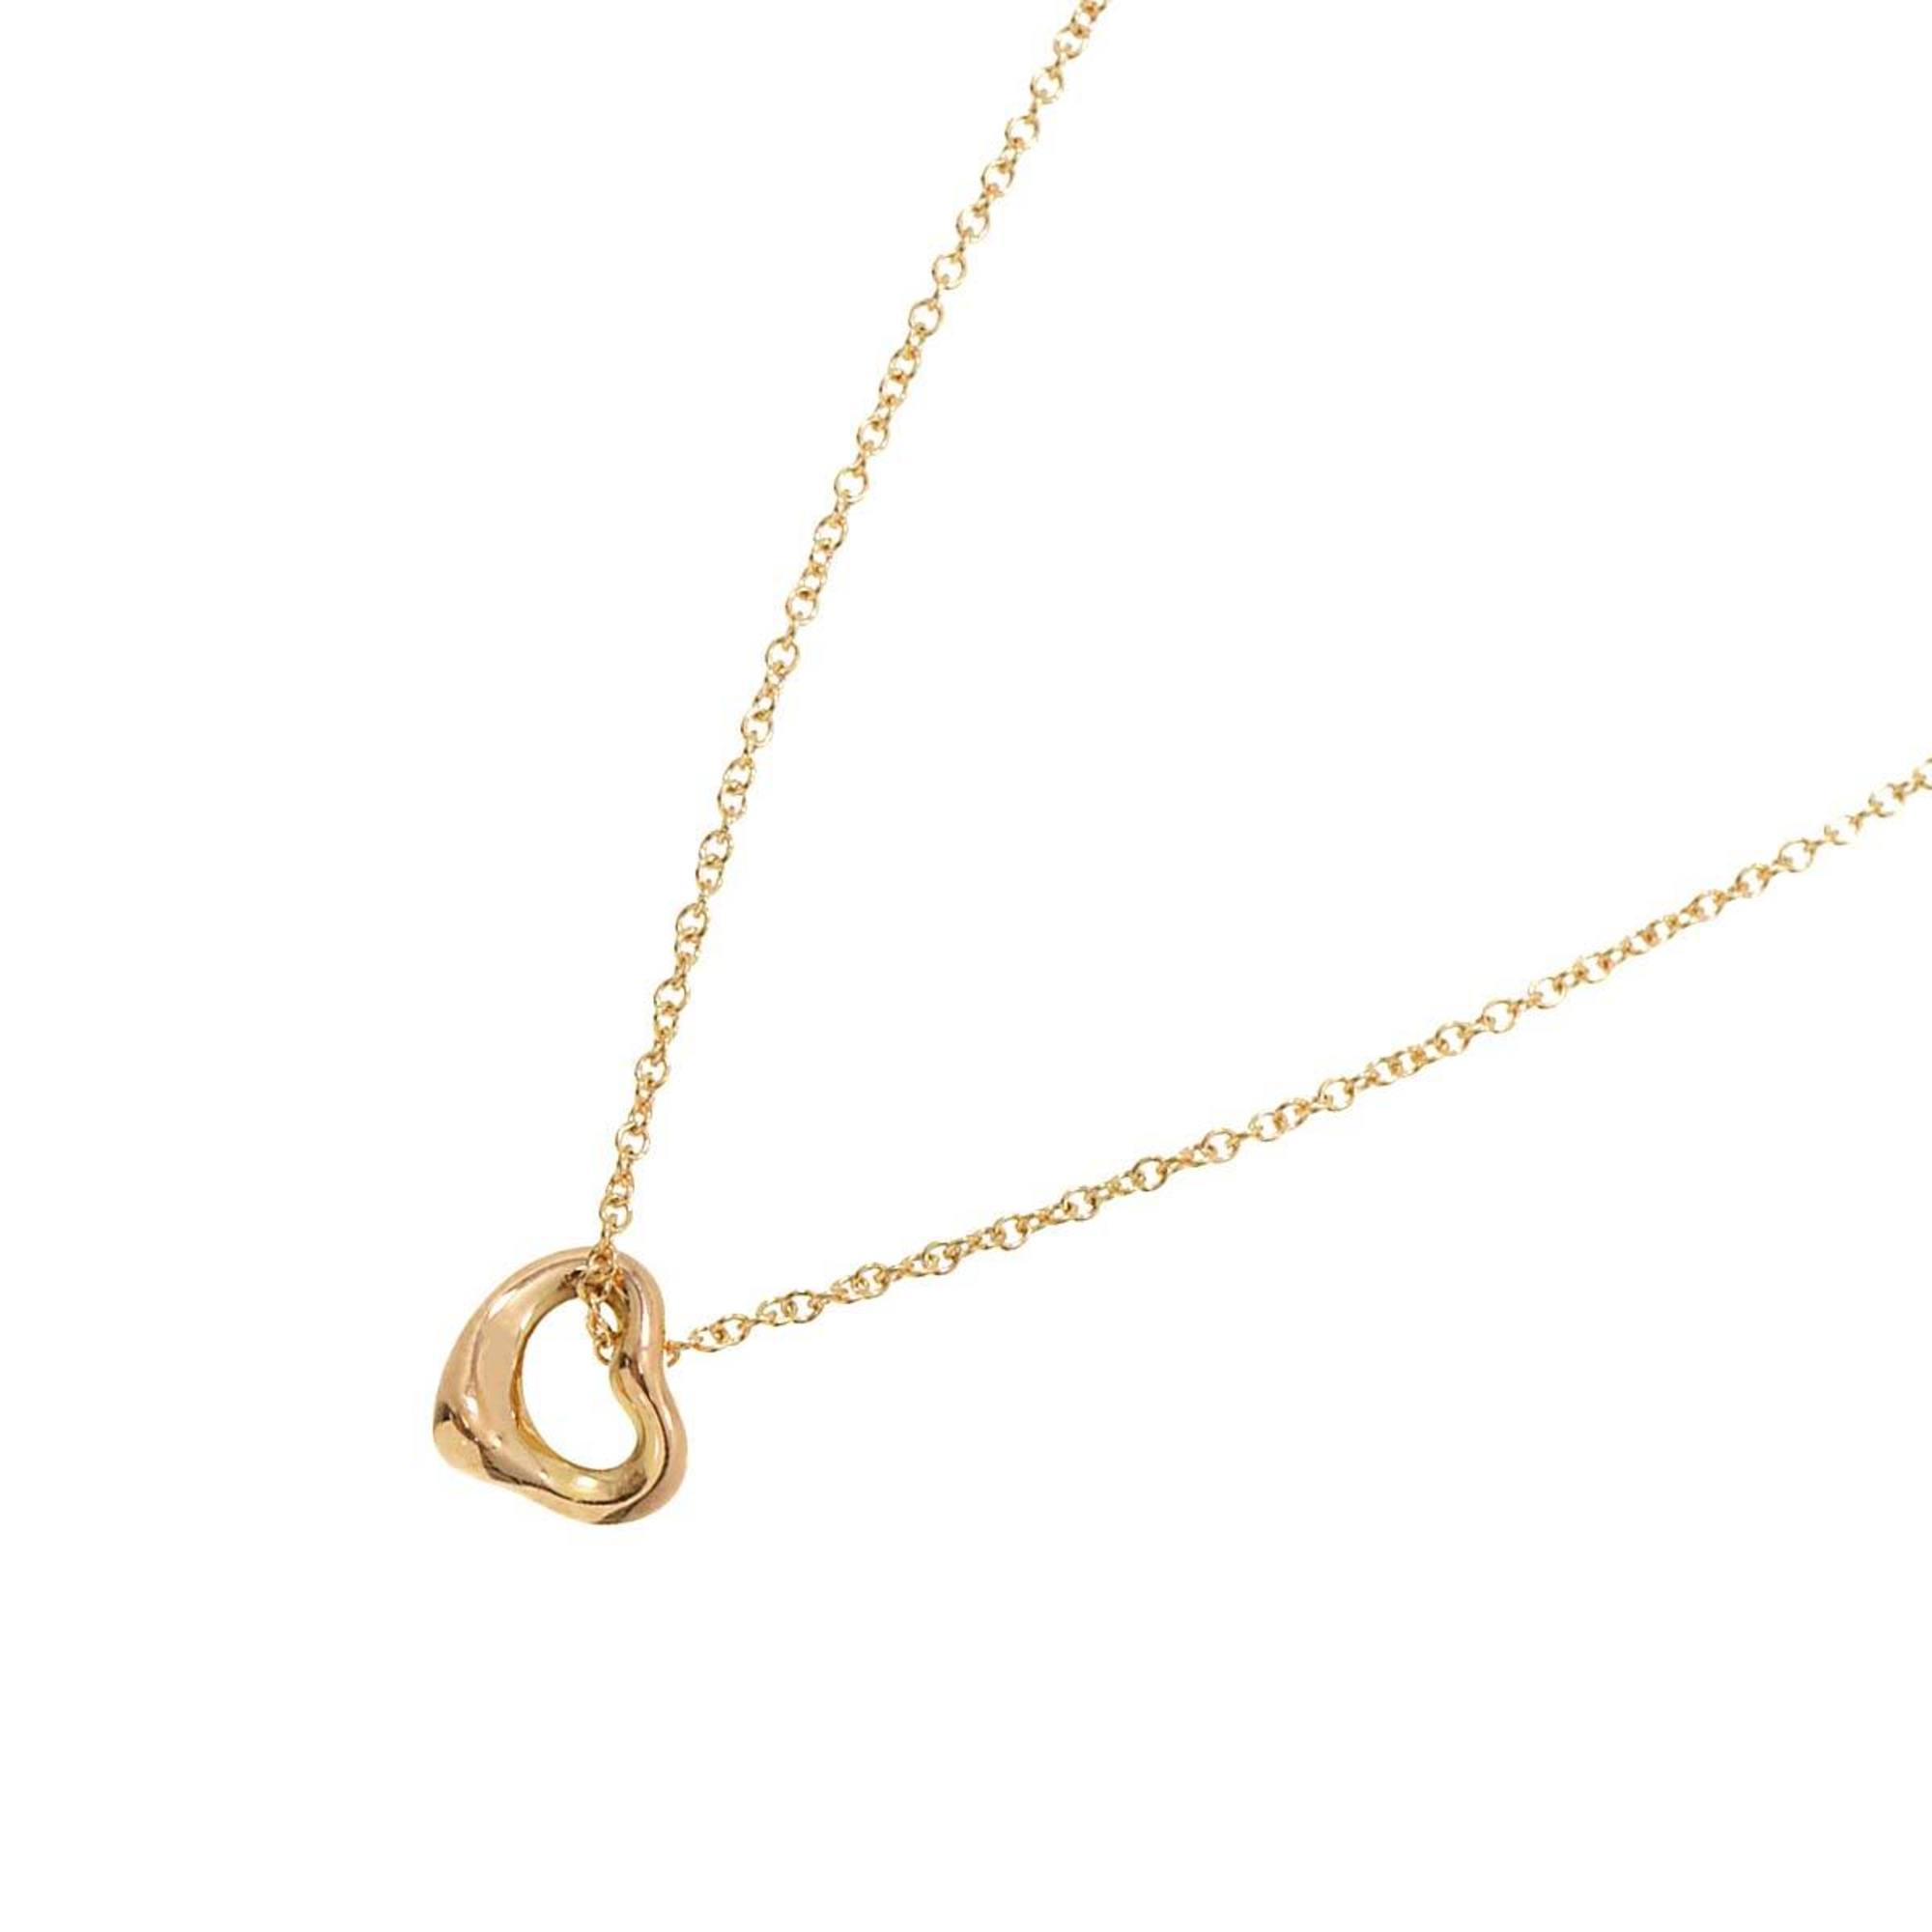 Tiffany & Co. Heart 7mm Necklace 40cm K18 PG Pink Gold 750 Open